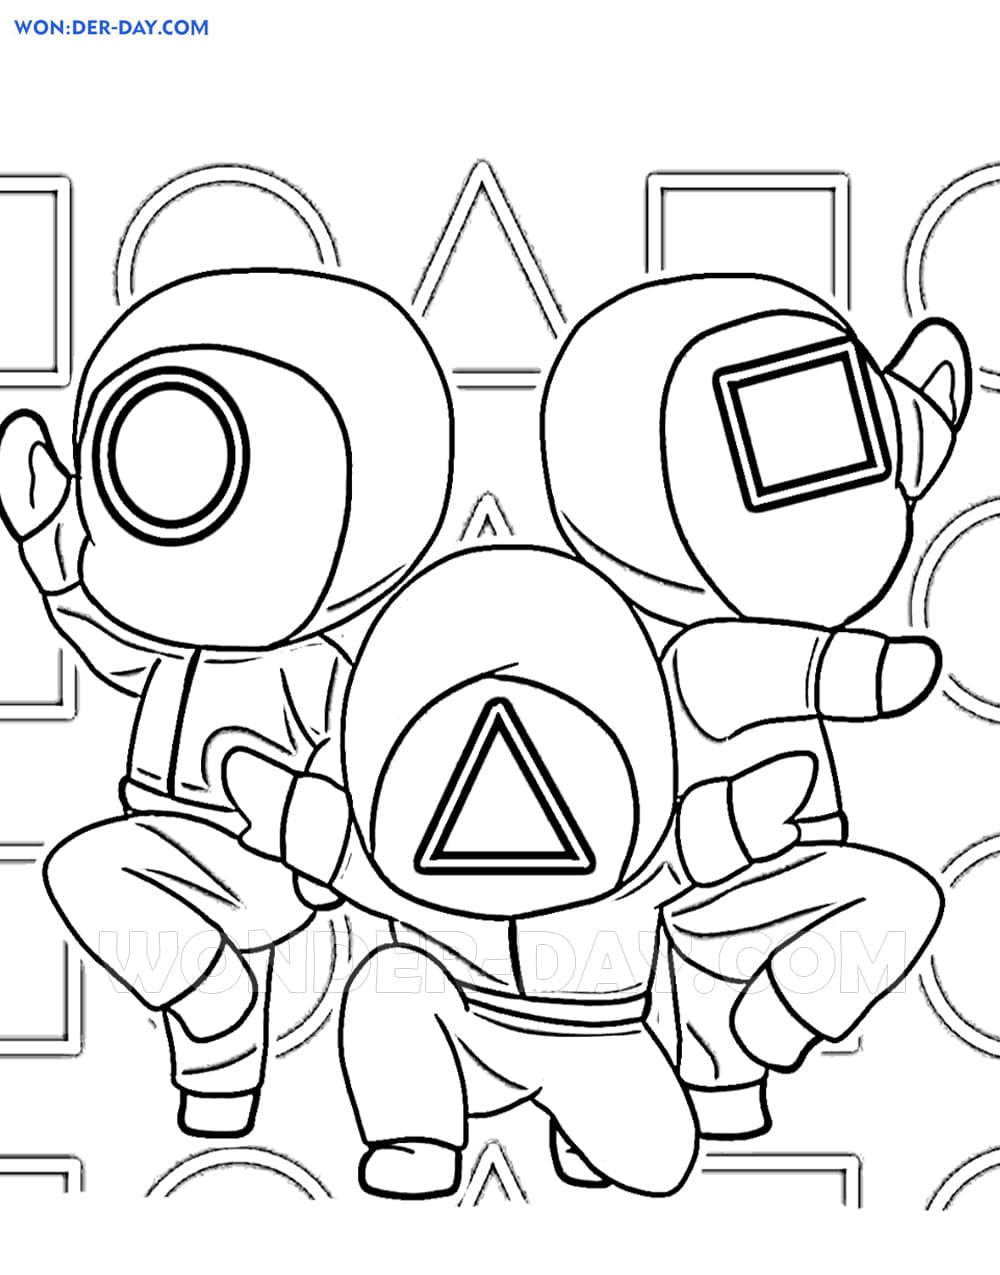 Squid Game Coloring Pages   Free Coloring Pages